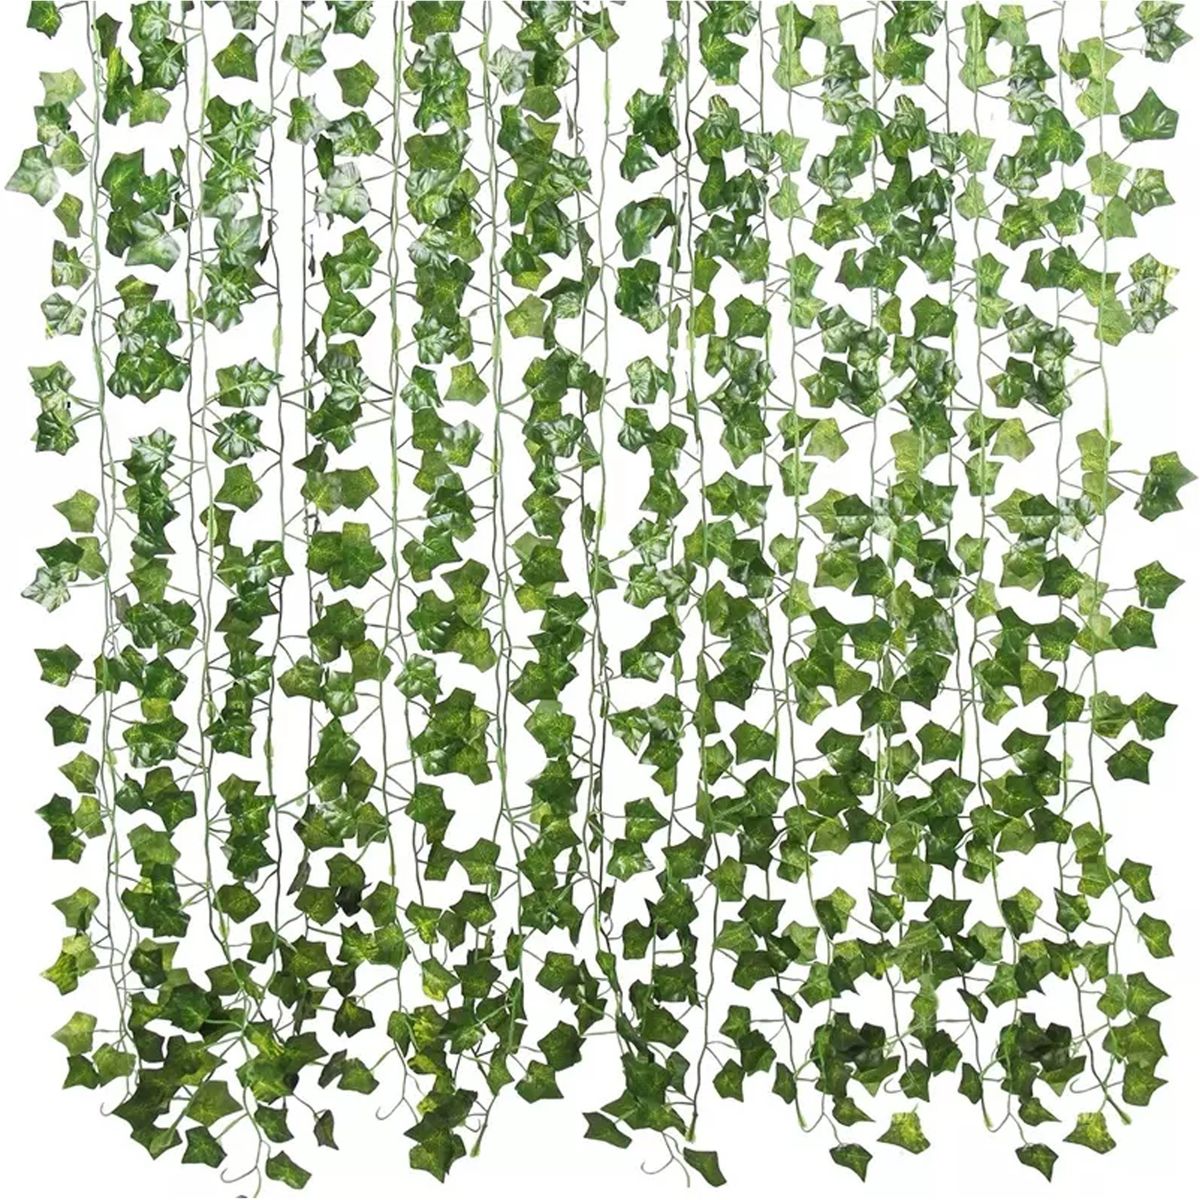 12 Strands Artificial Leaves Plants Vine Hanging Garland Wall Decor